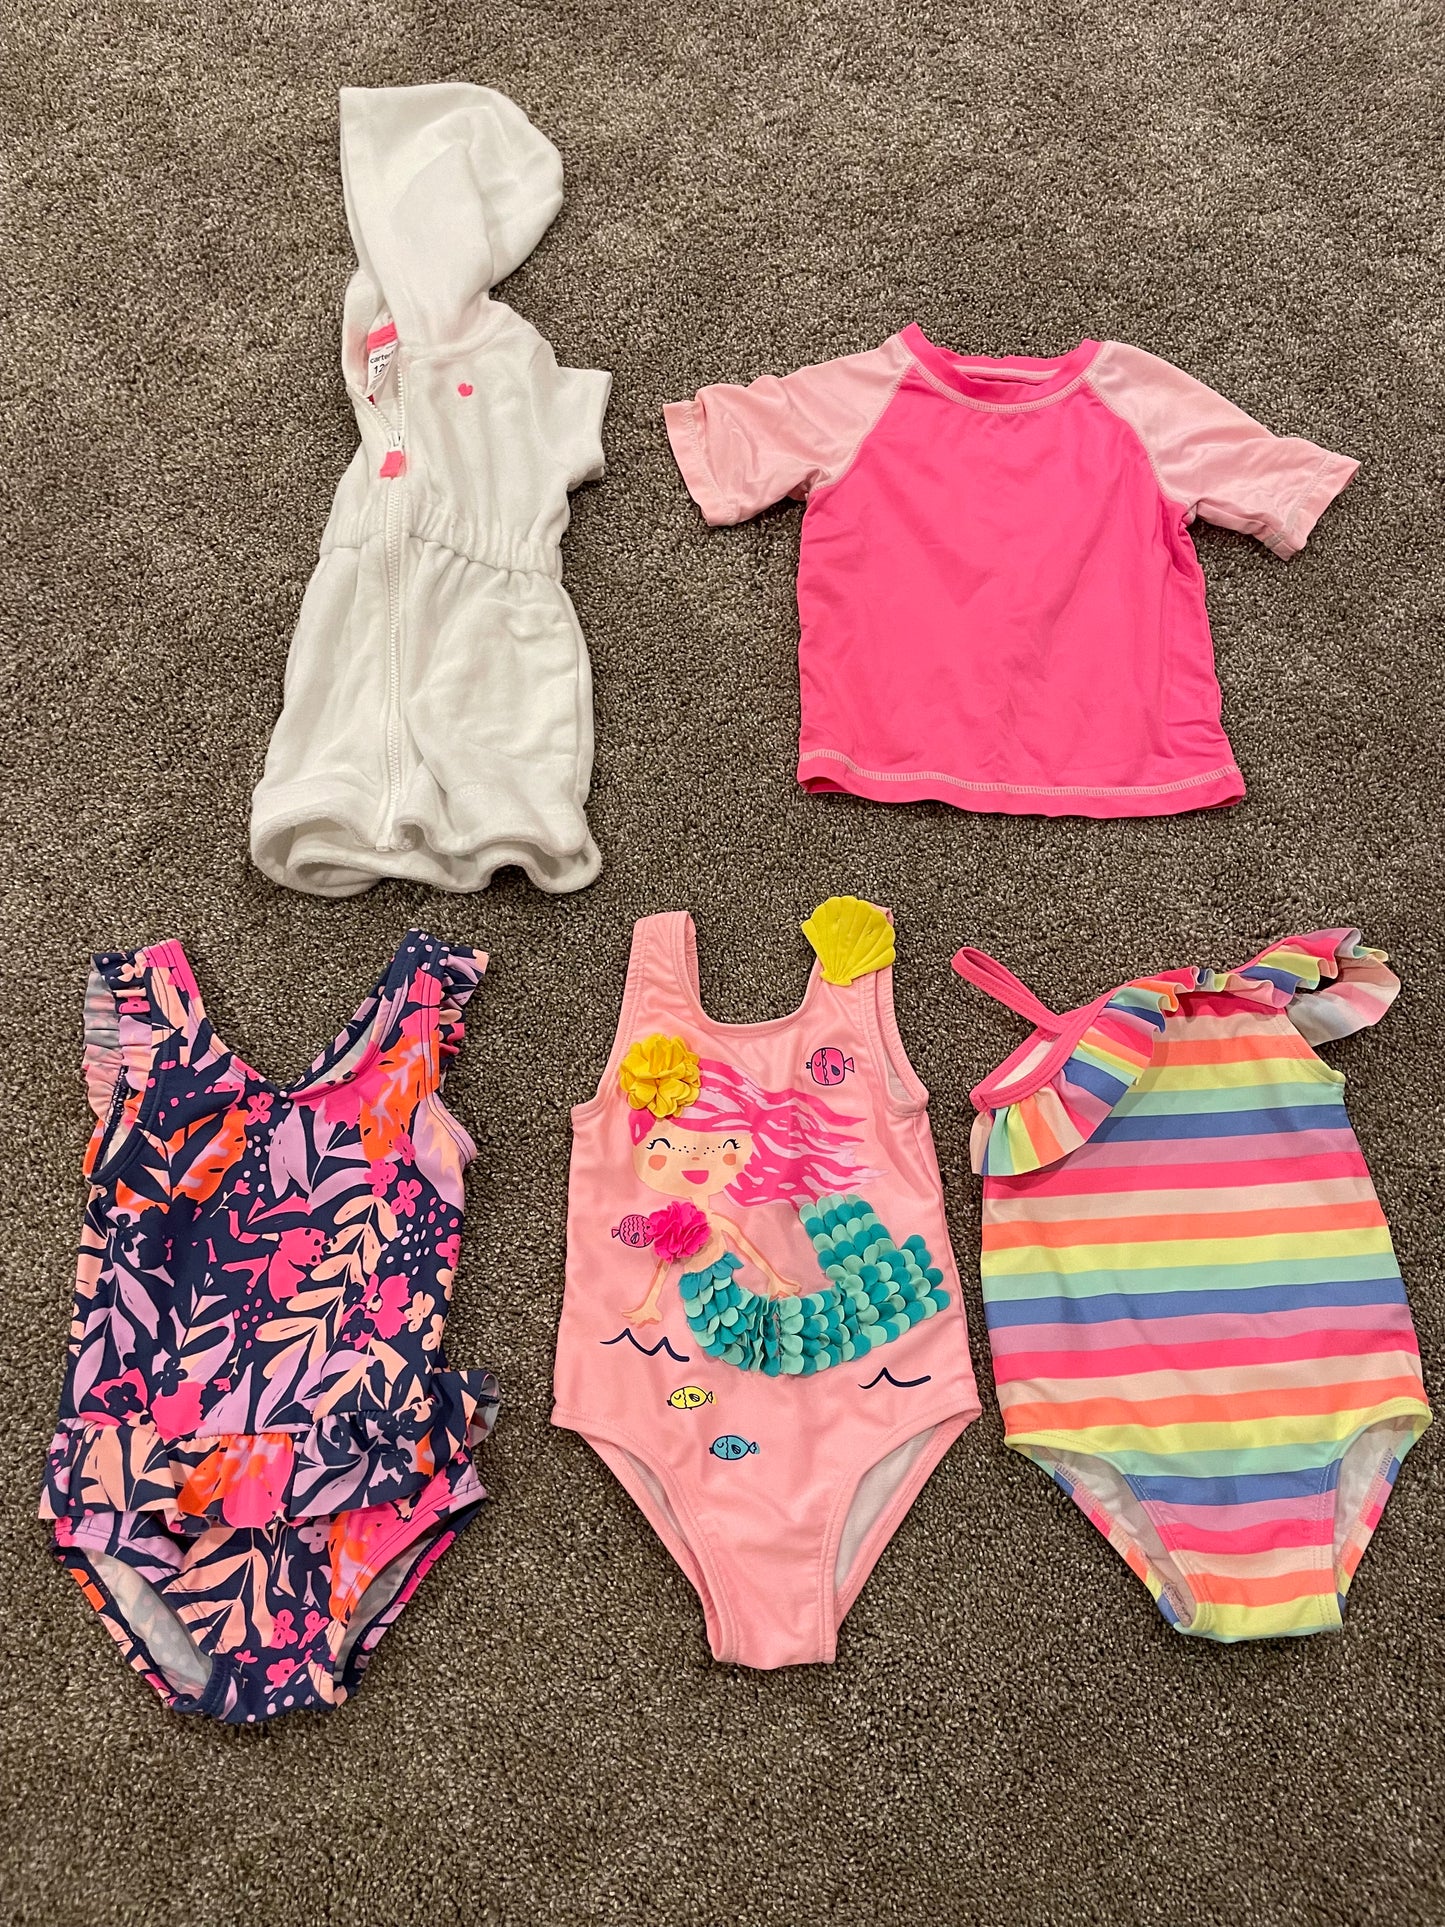 Girls 12 month swimsuit bundle with coverup